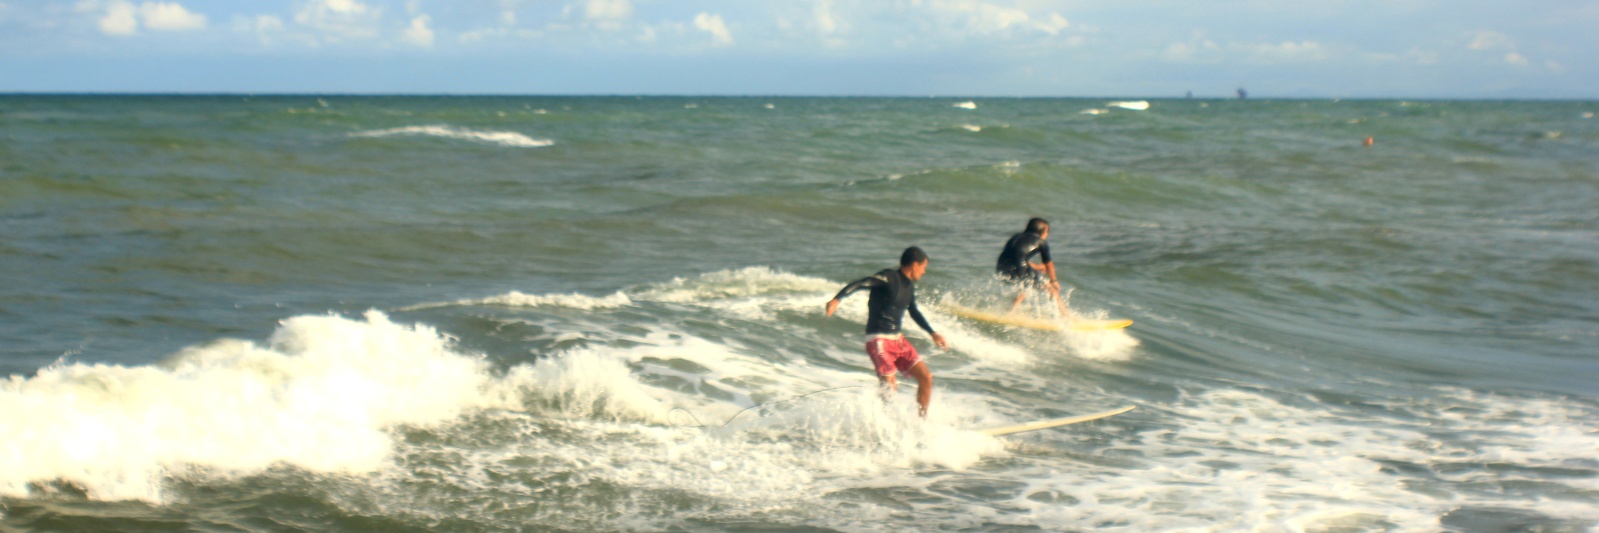 Surfing in the Marina beach & others